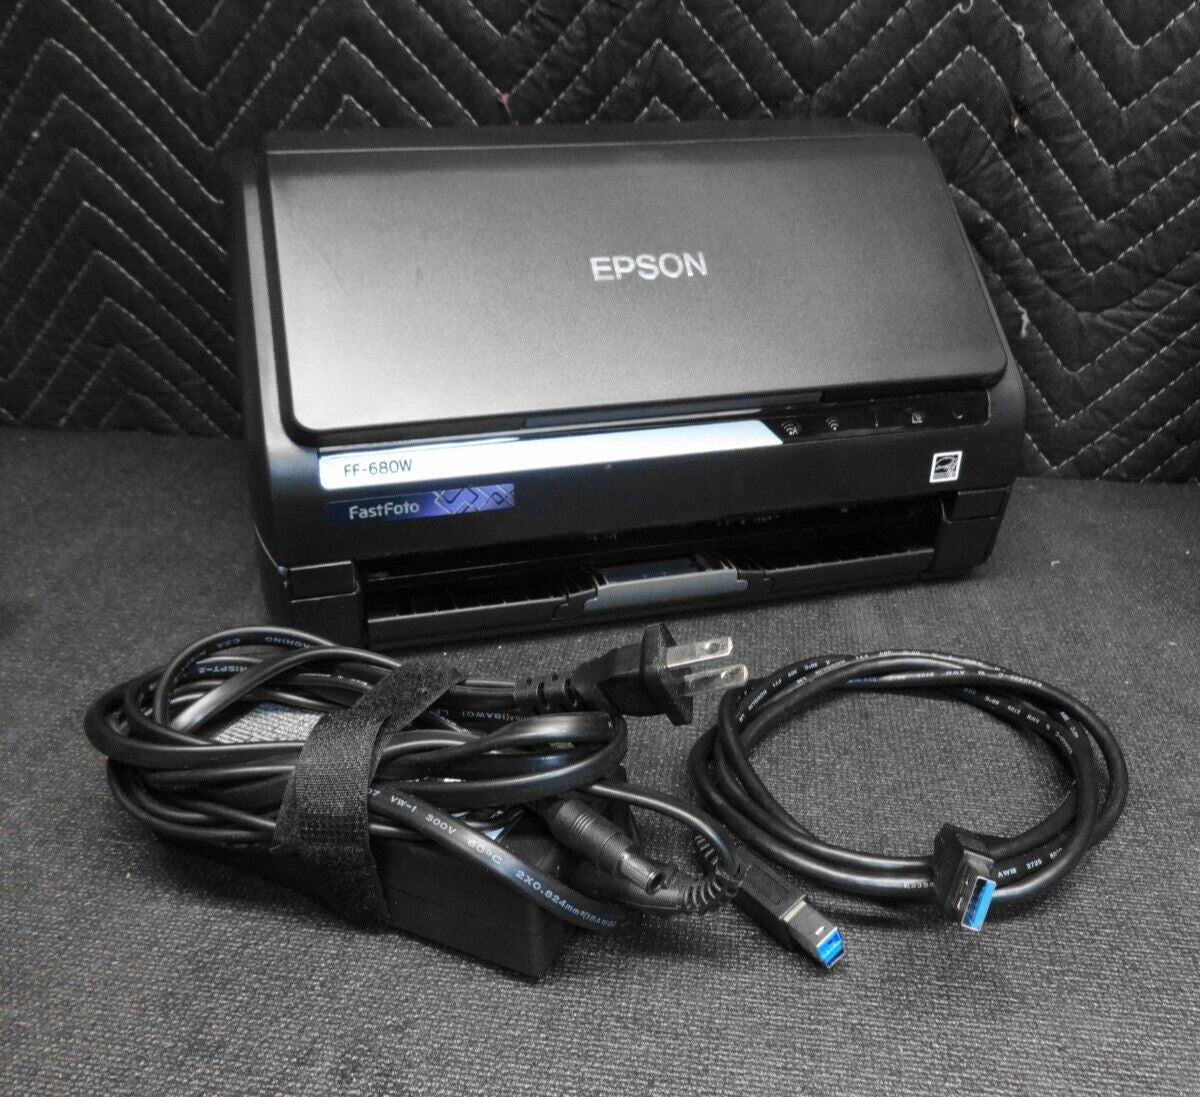 Epson Fastfoto FF-680W Wireless Photo and Document Scanning System